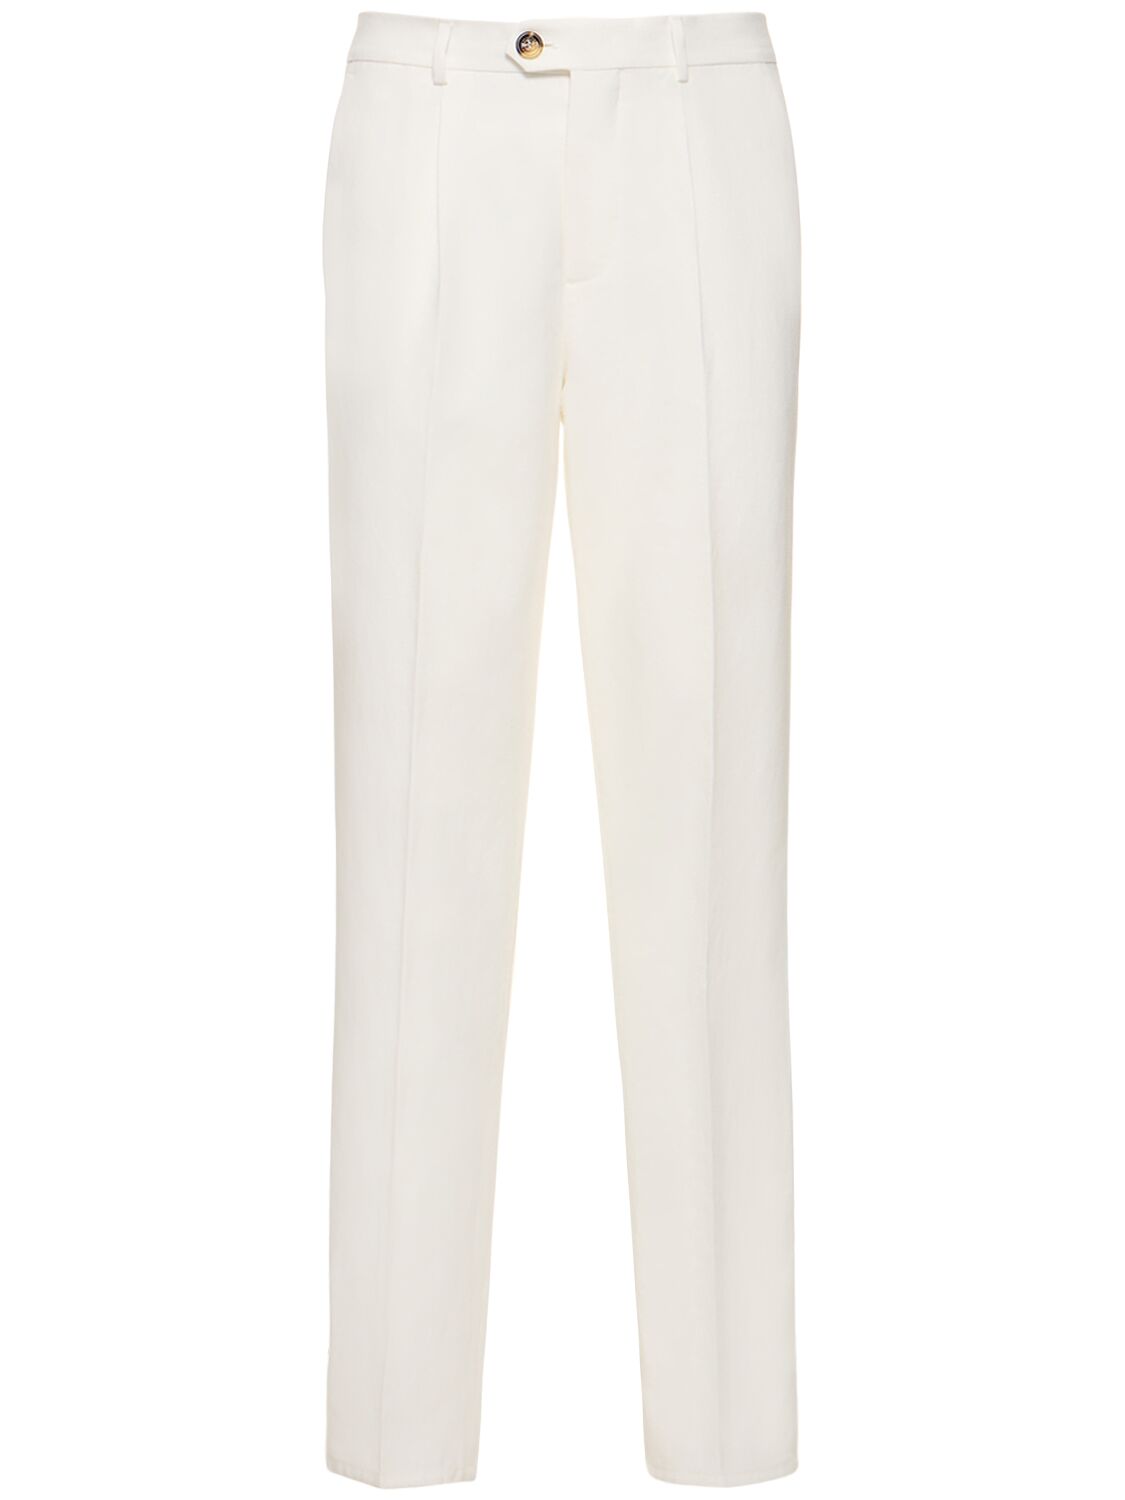 Image of Linen Pleated Pants